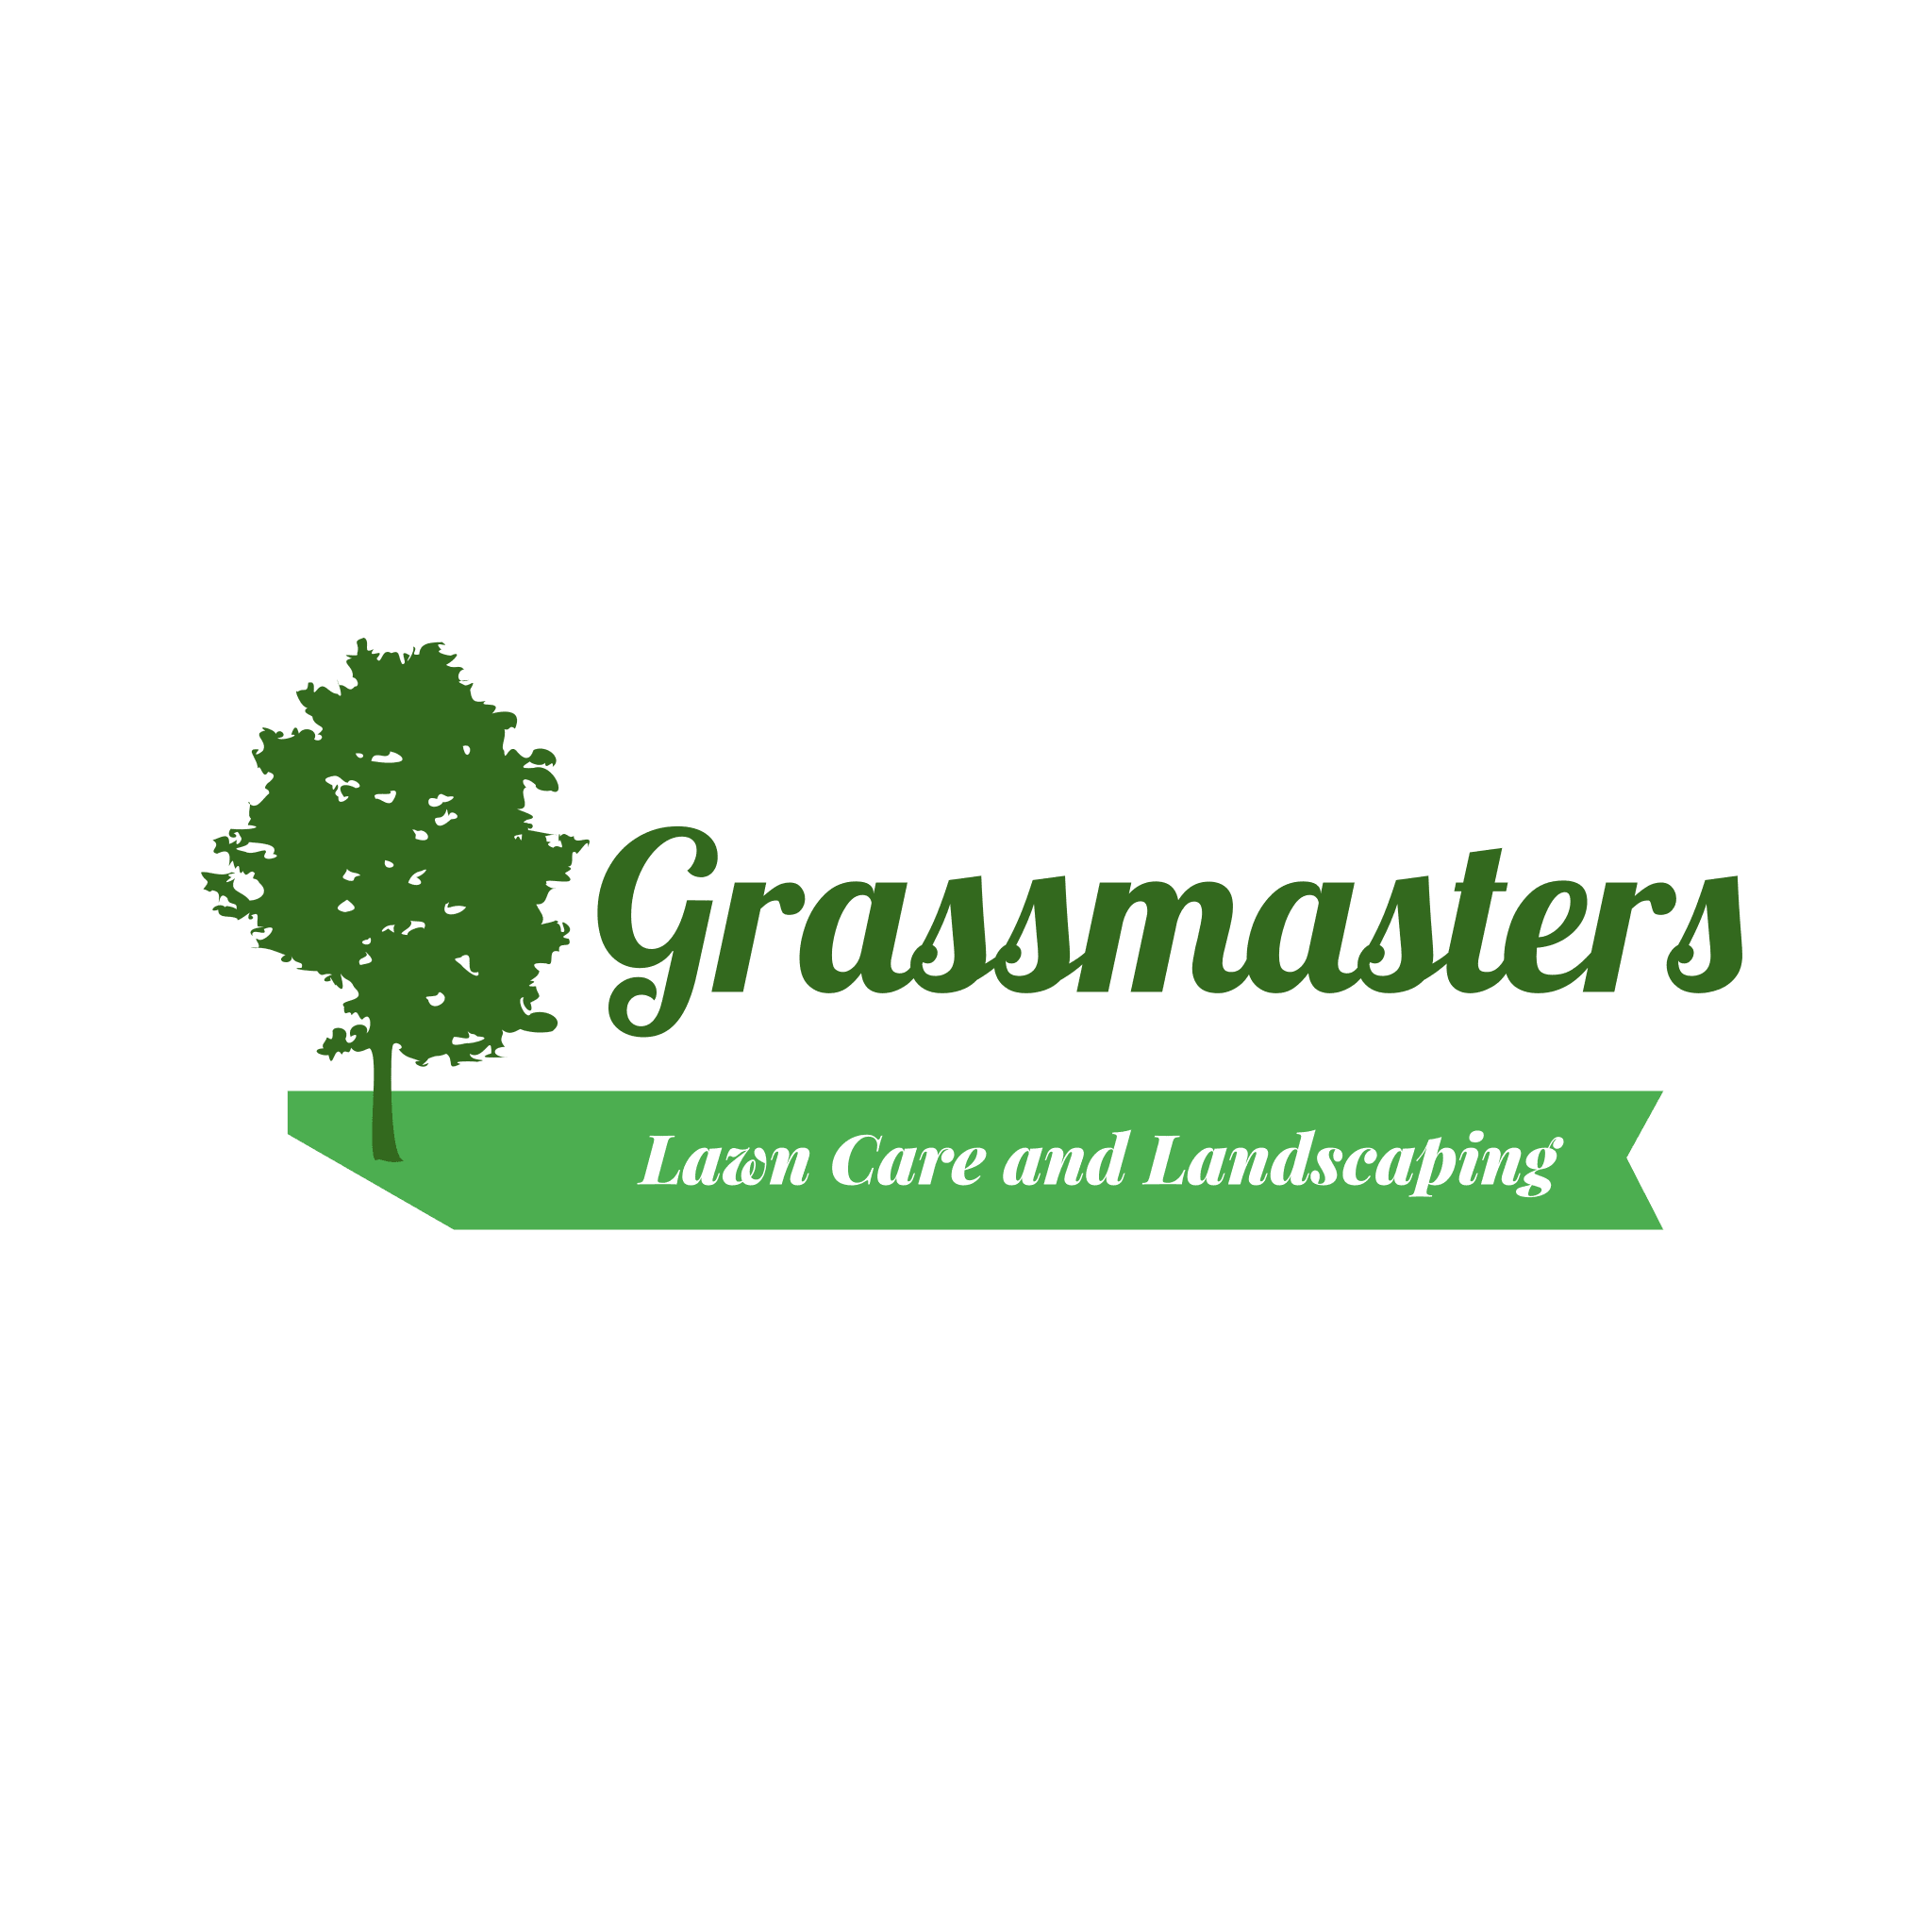 Grassmasters Lawn Care and Landscaping - Falkville, AL - (256)590-2726 | ShowMeLocal.com